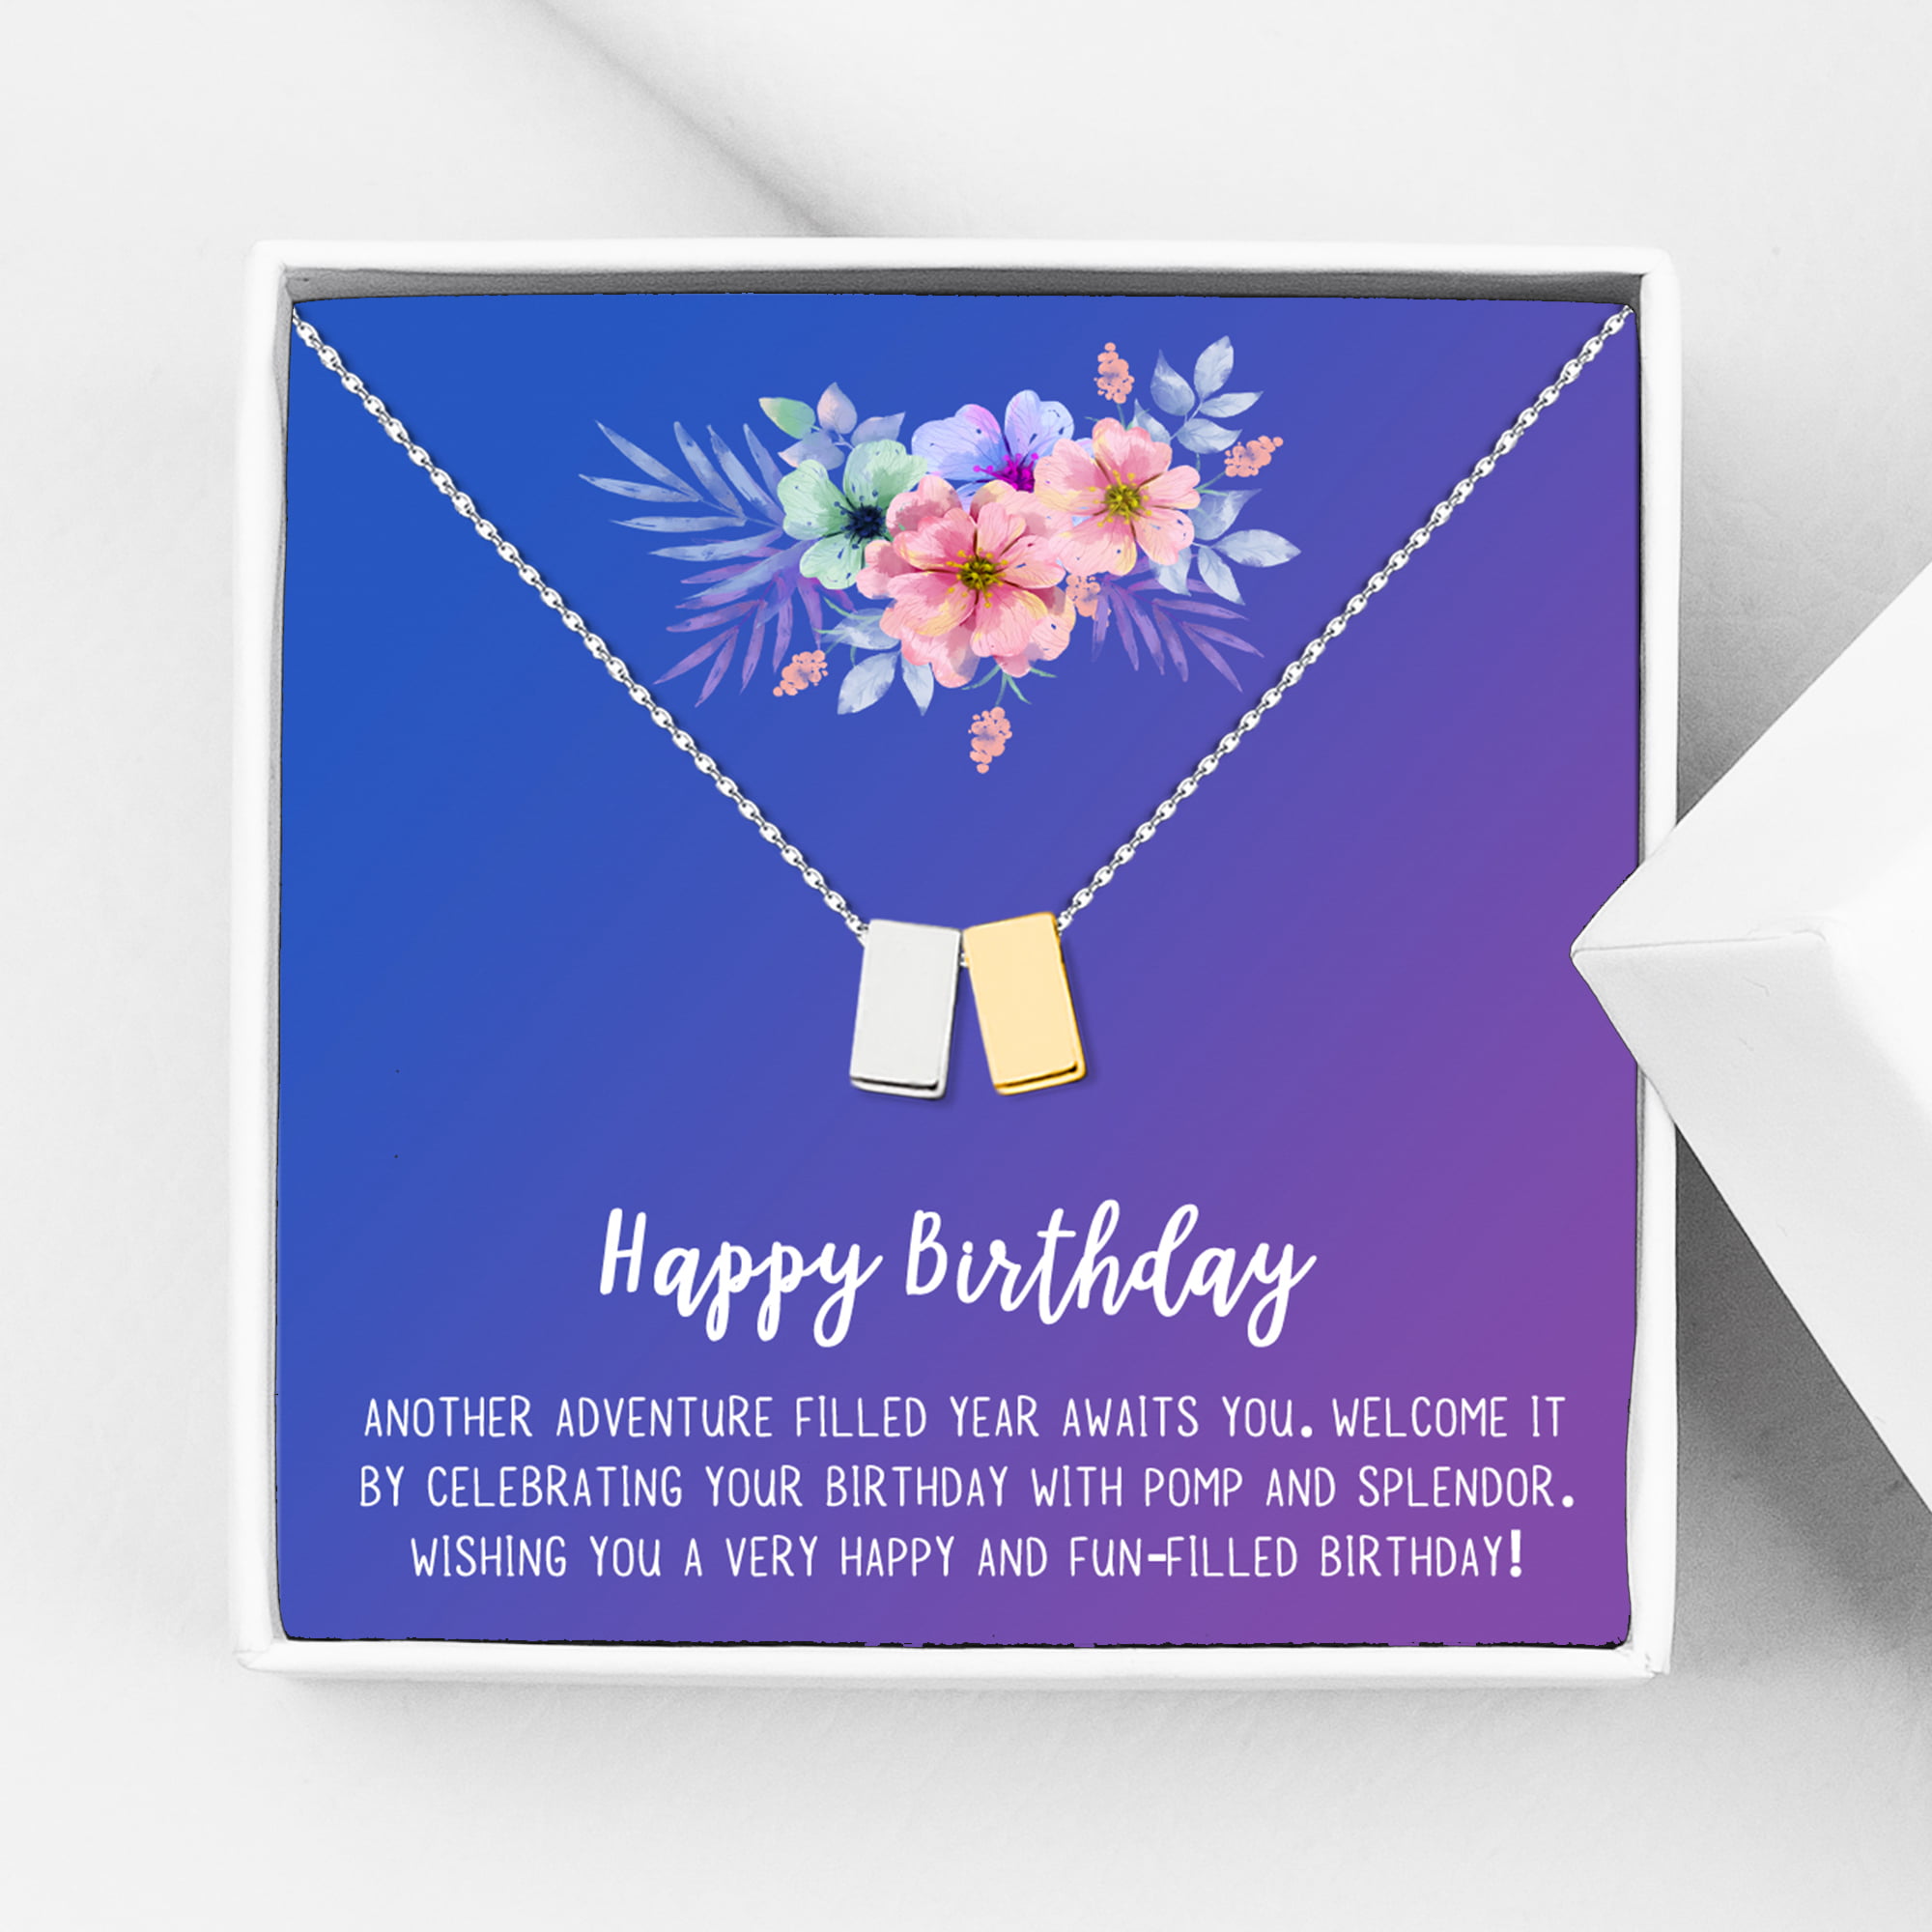 Details about   Anniversary Disney Card Personalised For Wife Husband Boyfriend Girlfriend Her 